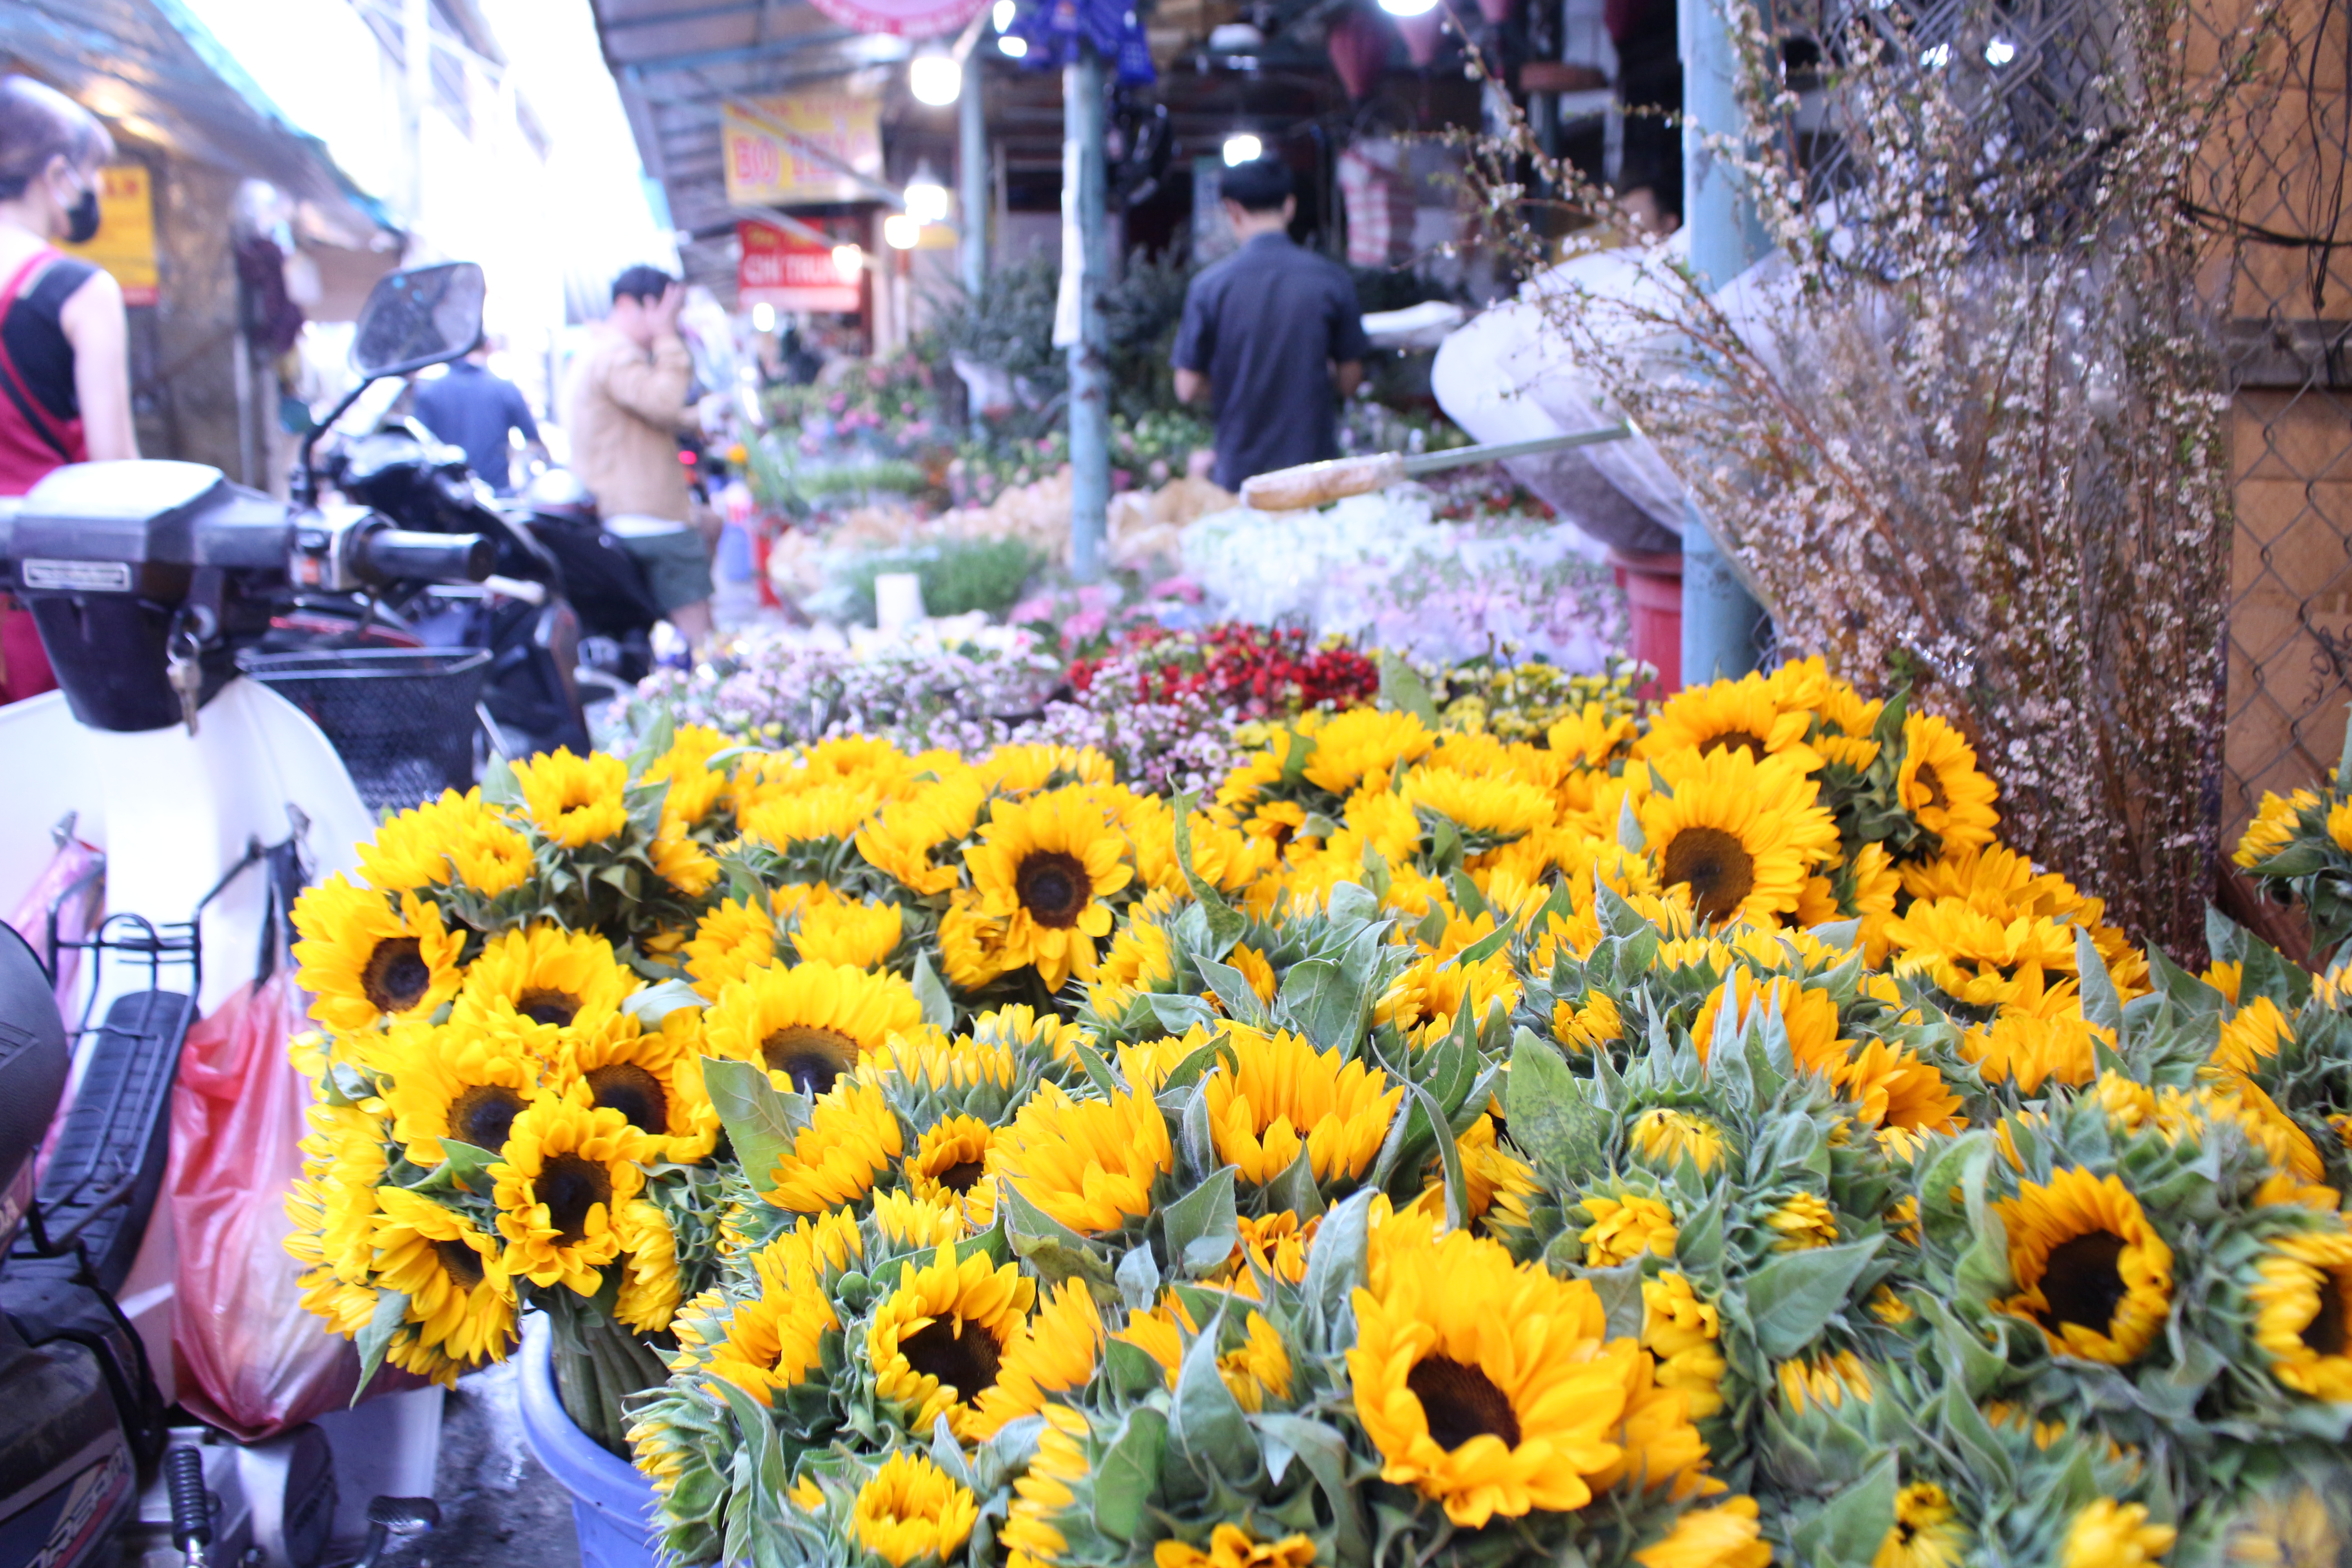 Sunflowers are sold at Ho Thi Ky Market in District 10, Ho Chi Minh City. Photo: Ray Kuschert / Tuoi Tre News